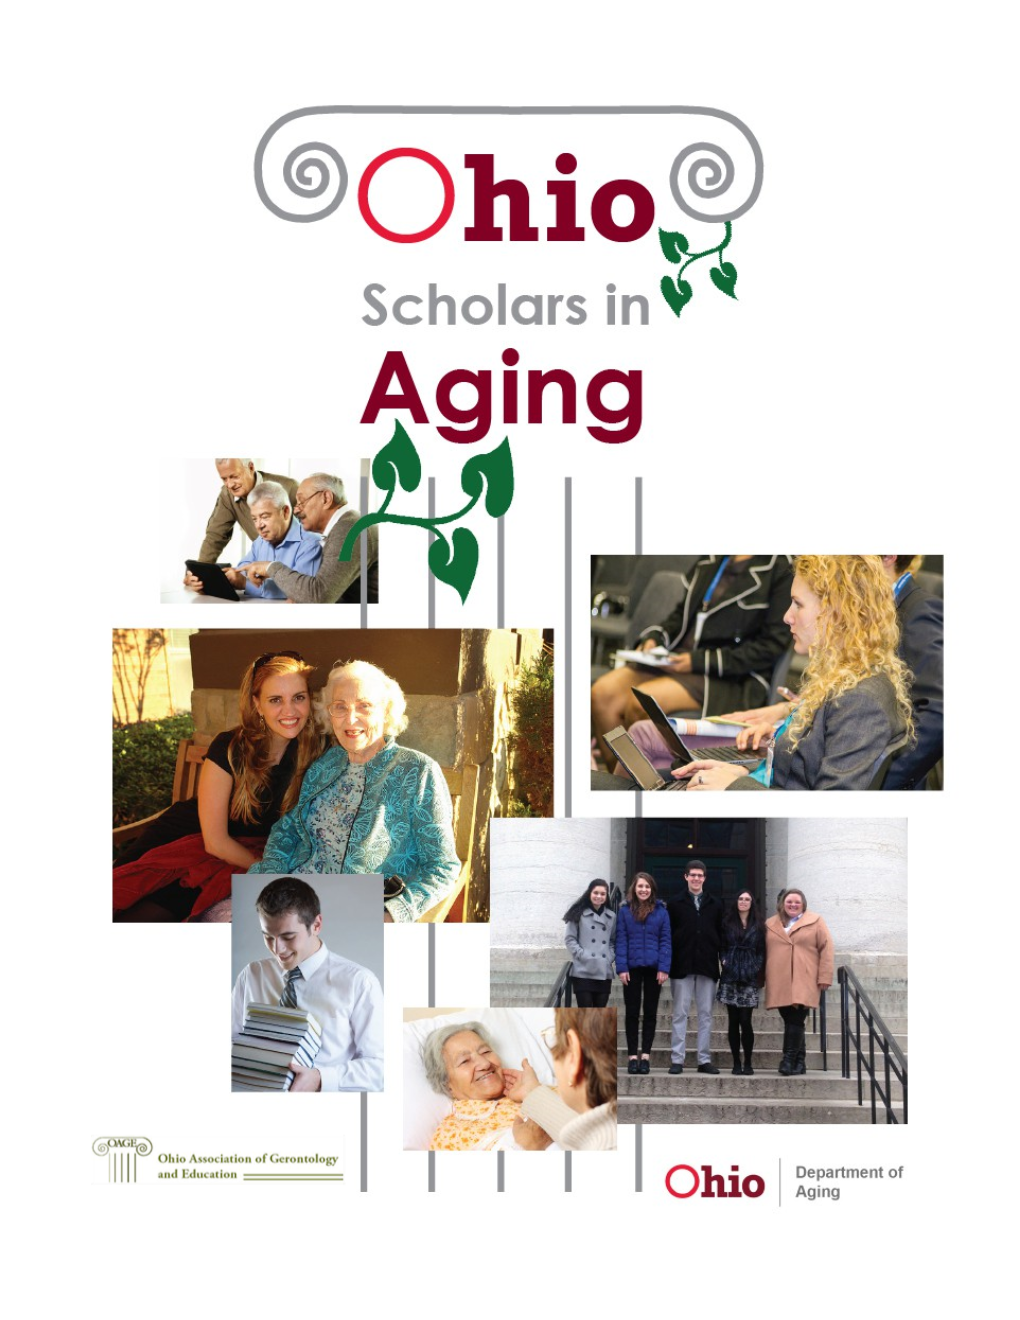 About Ohio Scholars in Aging